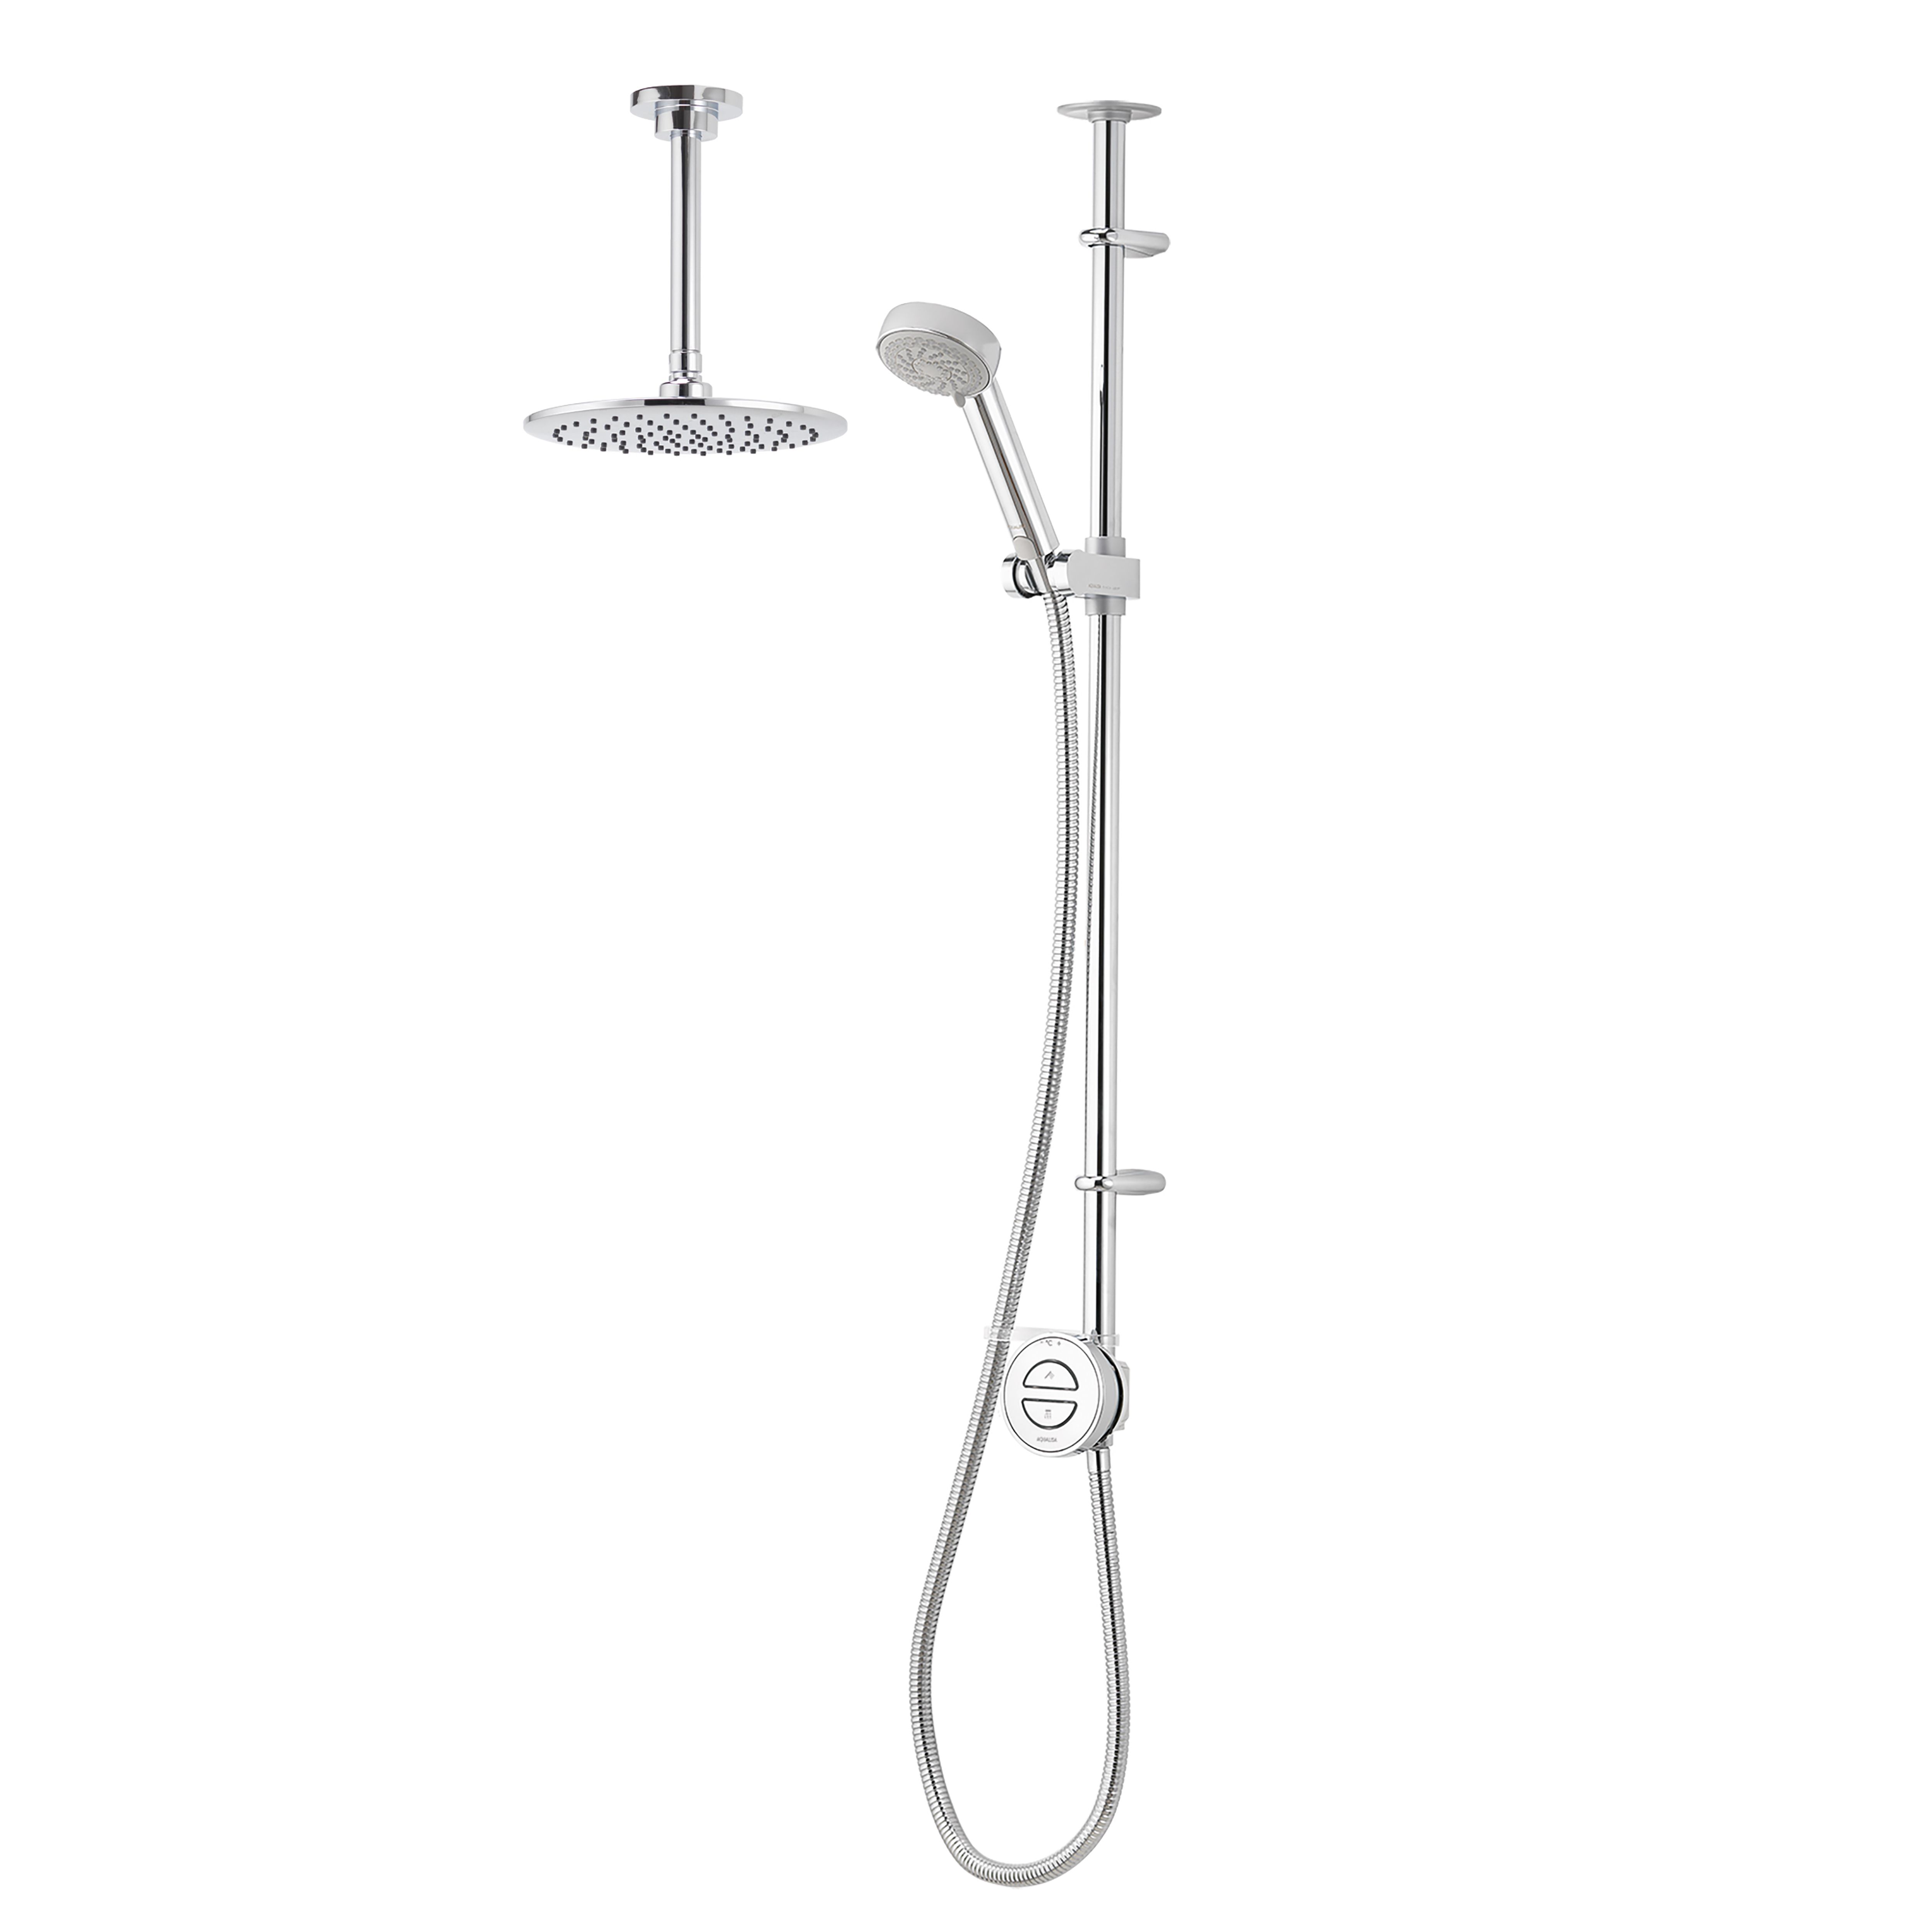 Aqualisa Smart Link Exposed valve Gravity-pumped Ceiling fed Smart Digital Shower with Adjustable & Fixed Shower head